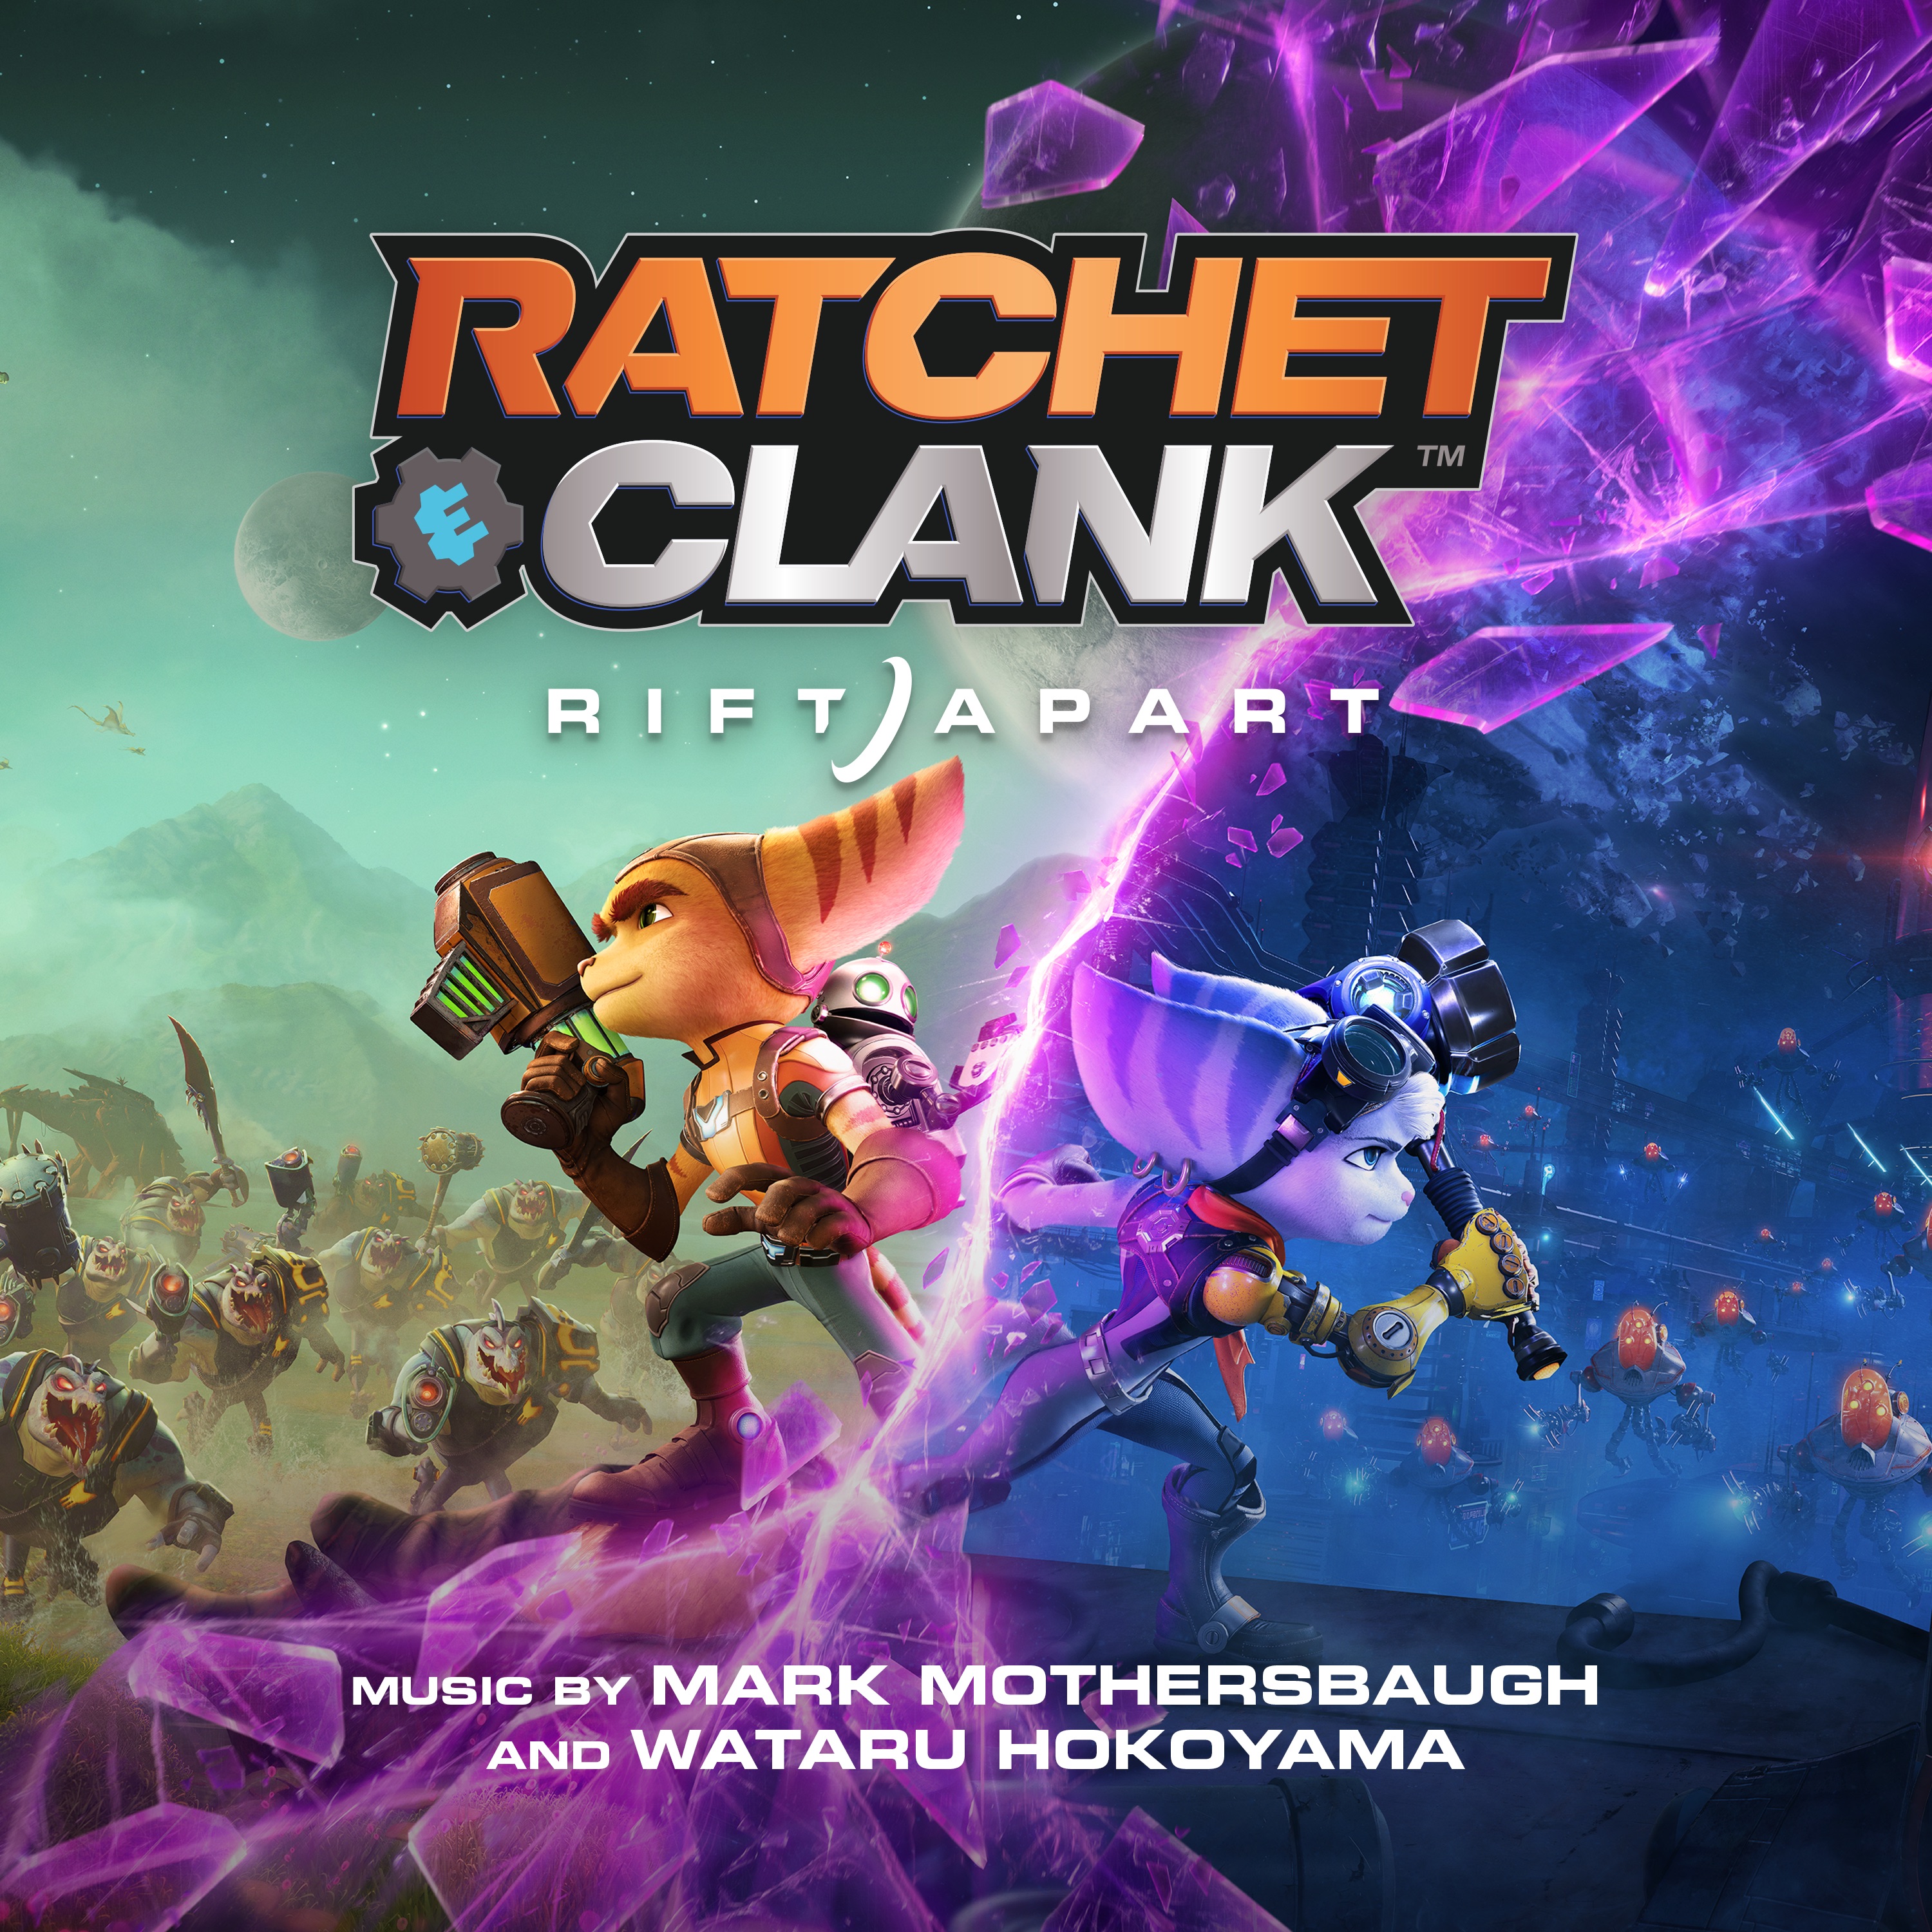 Ratchet and clank rift apart steam фото 58